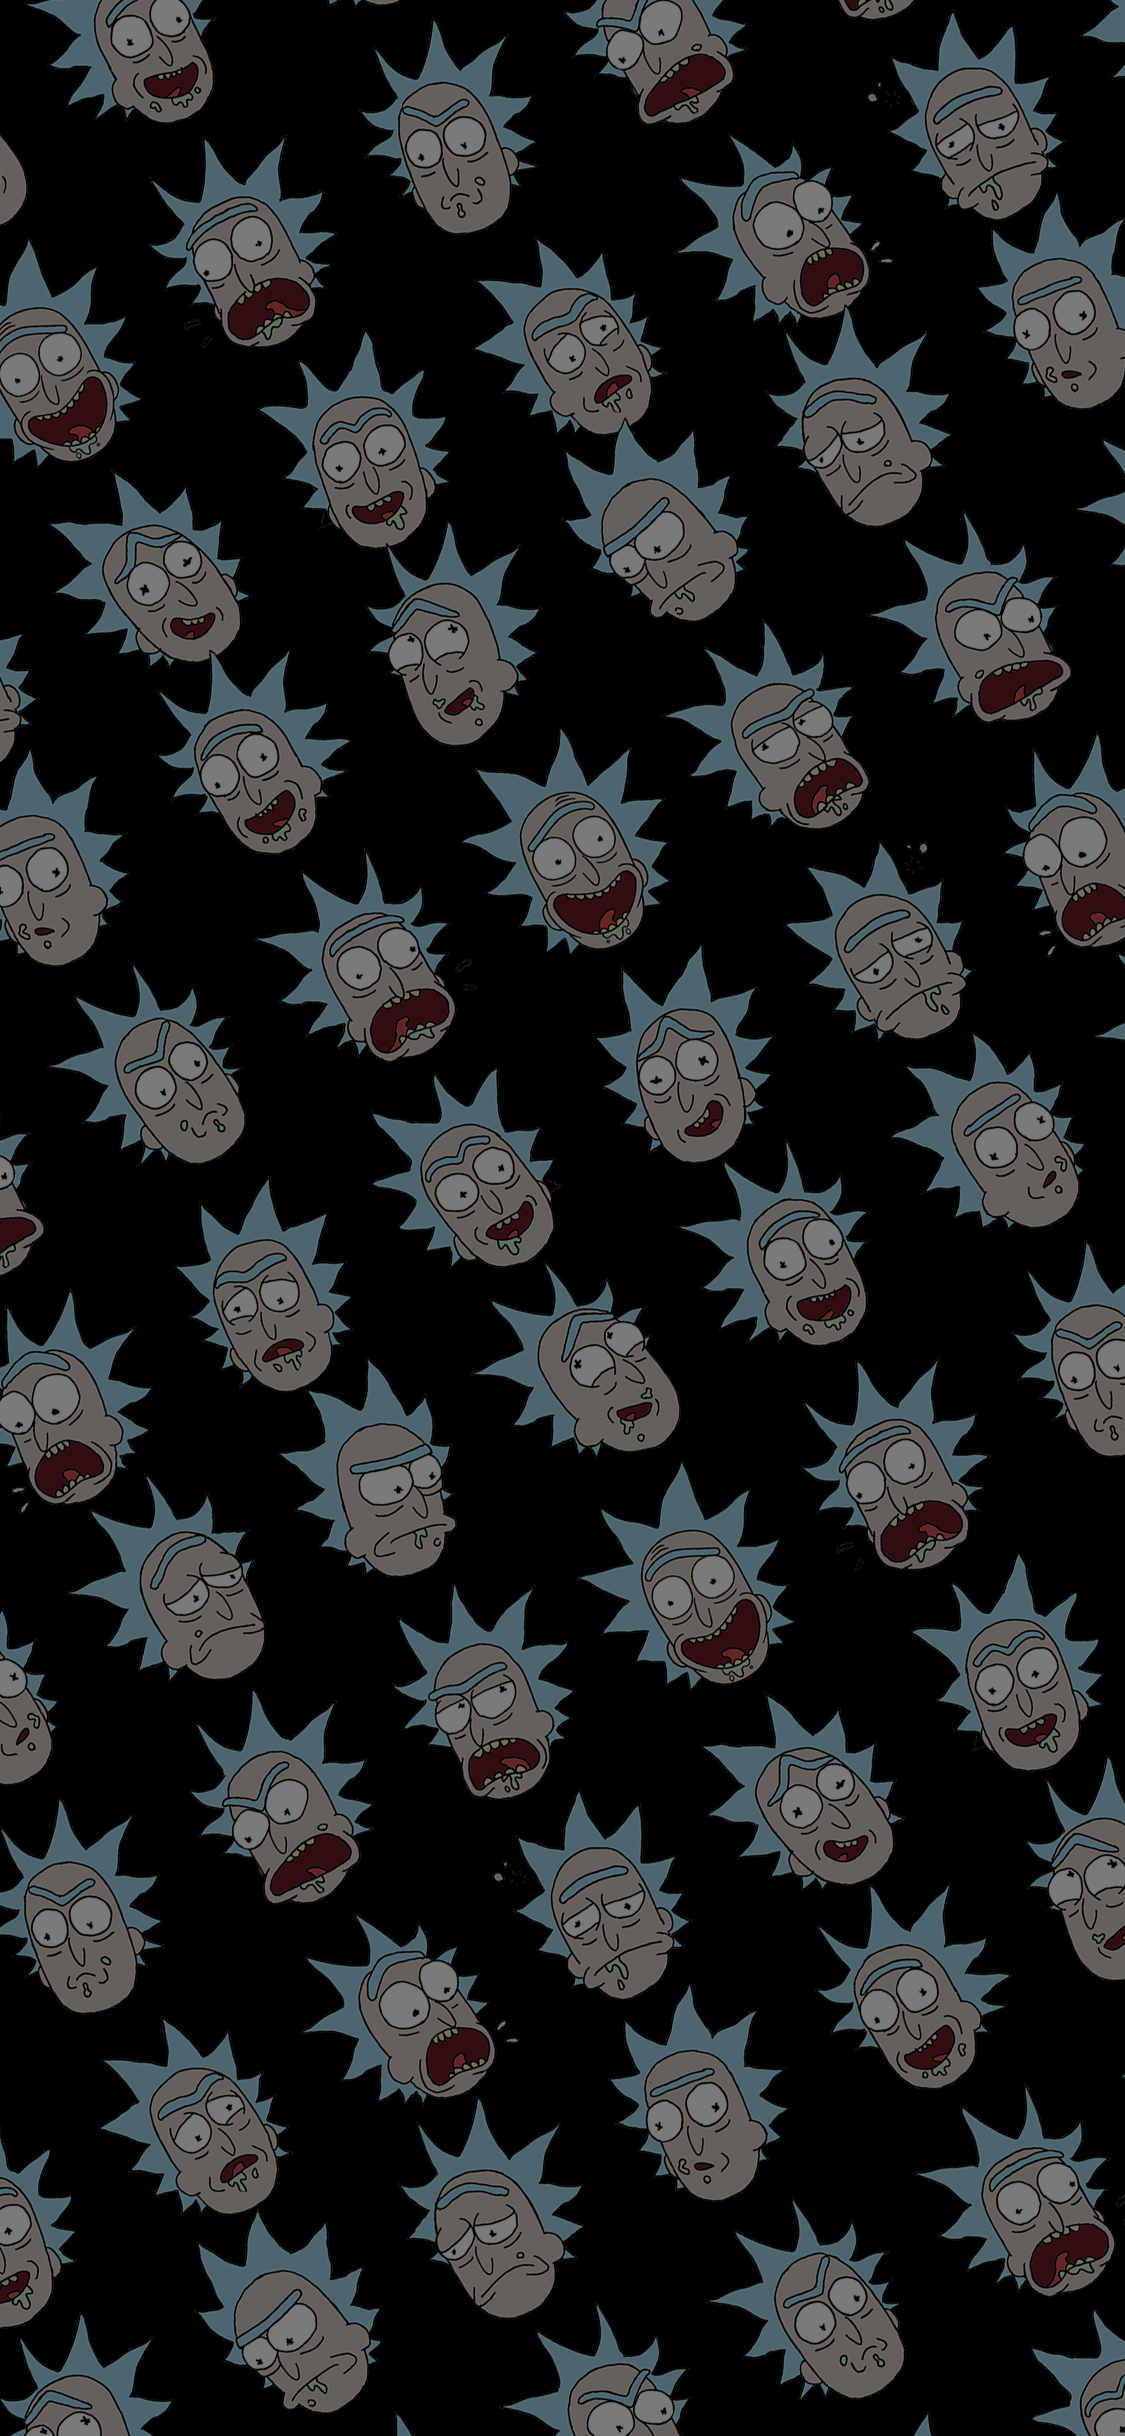 Rick and Morty phone wallpaper collection 153